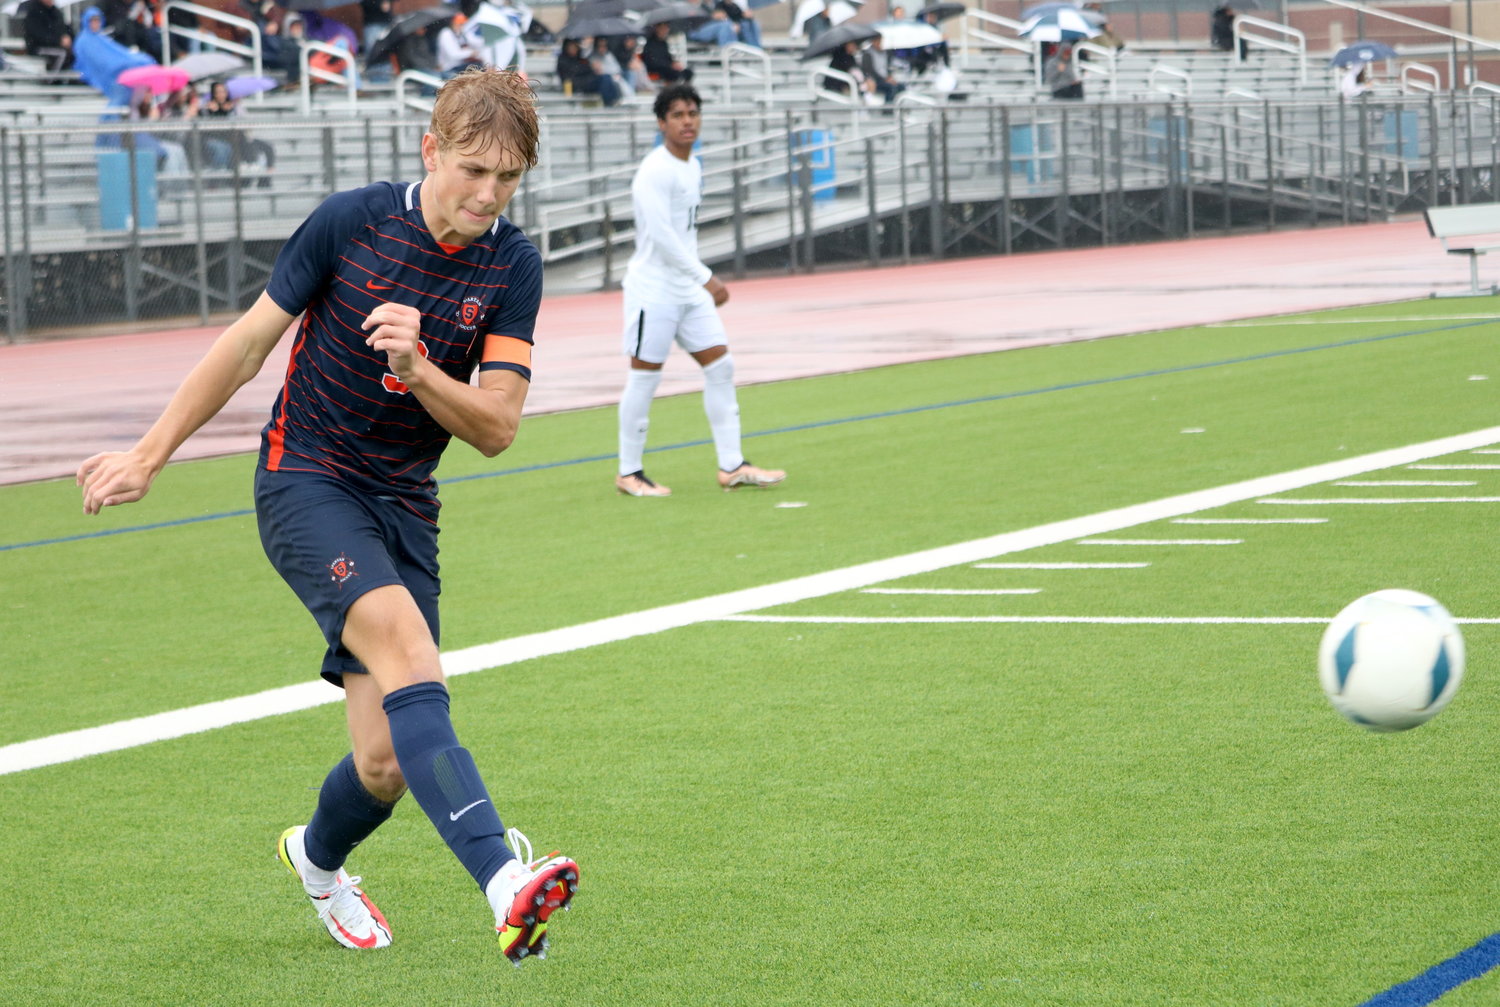 Hunter Merritt crosses a ball during Saturday's game between Seven Lakes and Mayde Creek at the Seven Lakes soccer field.